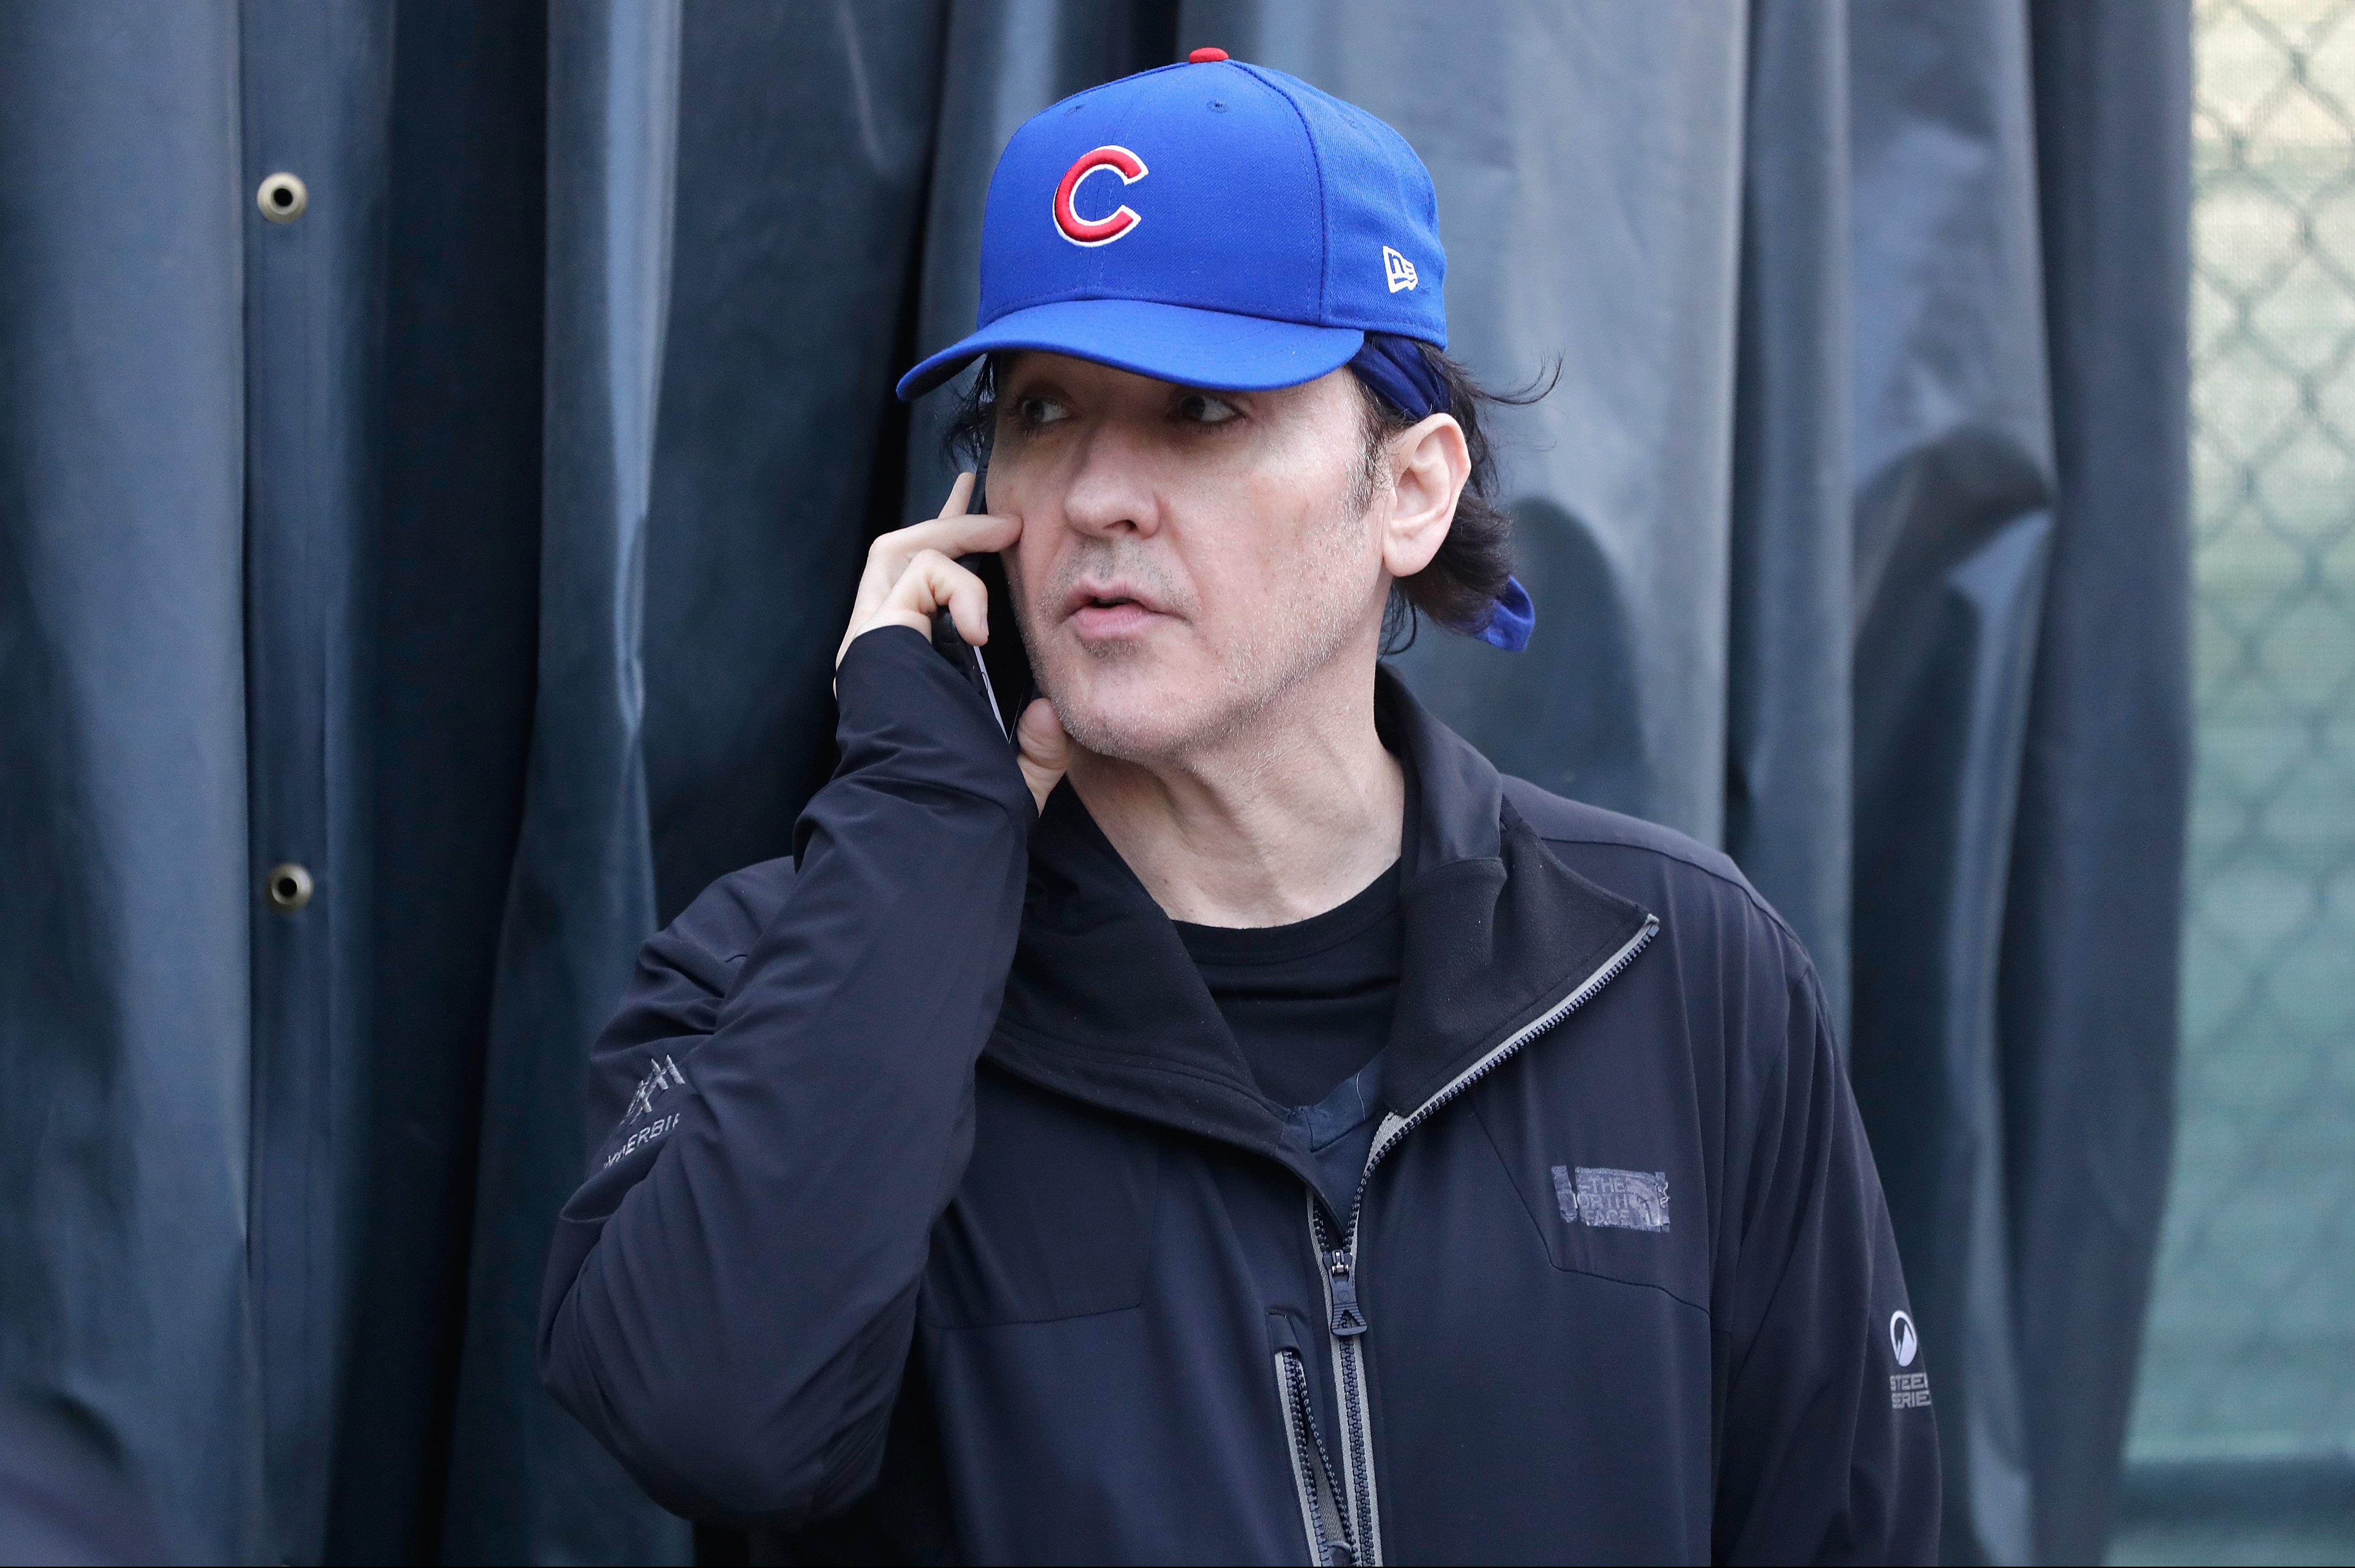 John Cusack stands outside Wrigley Field in Game Three of the 2016 World Series between the Chicago Cubs and the Cleveland Indians at Wrigley Field on October 28, 2016 in Chicago, Illinois. A member of Barstool Sports recently tried to confront the actor about his dual Cubs/White Sox fandom